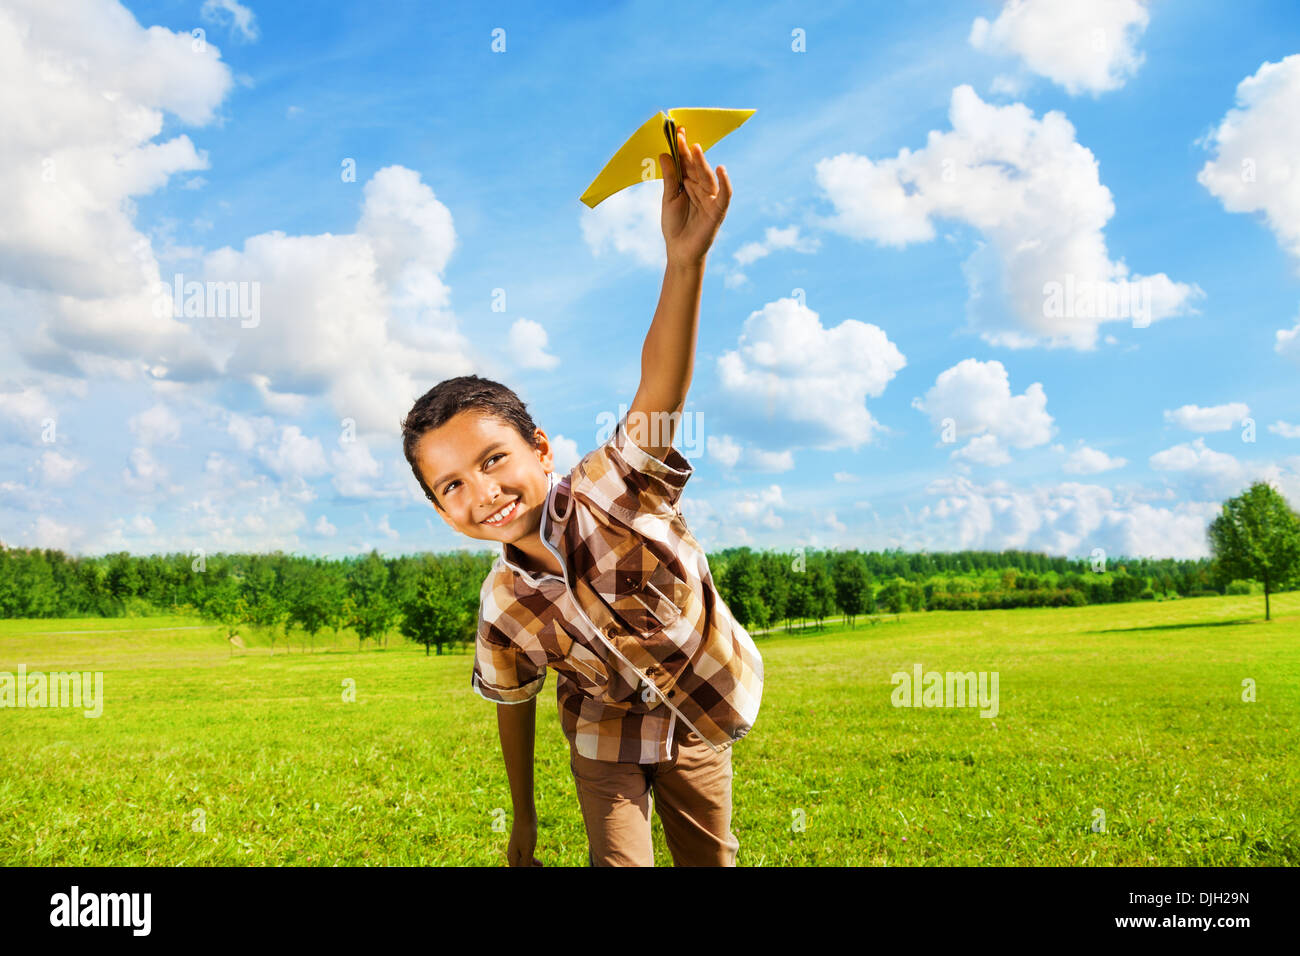 Happy boy leaning and throwing yellow paper airplane on bright sunny day in the field Stock Photo